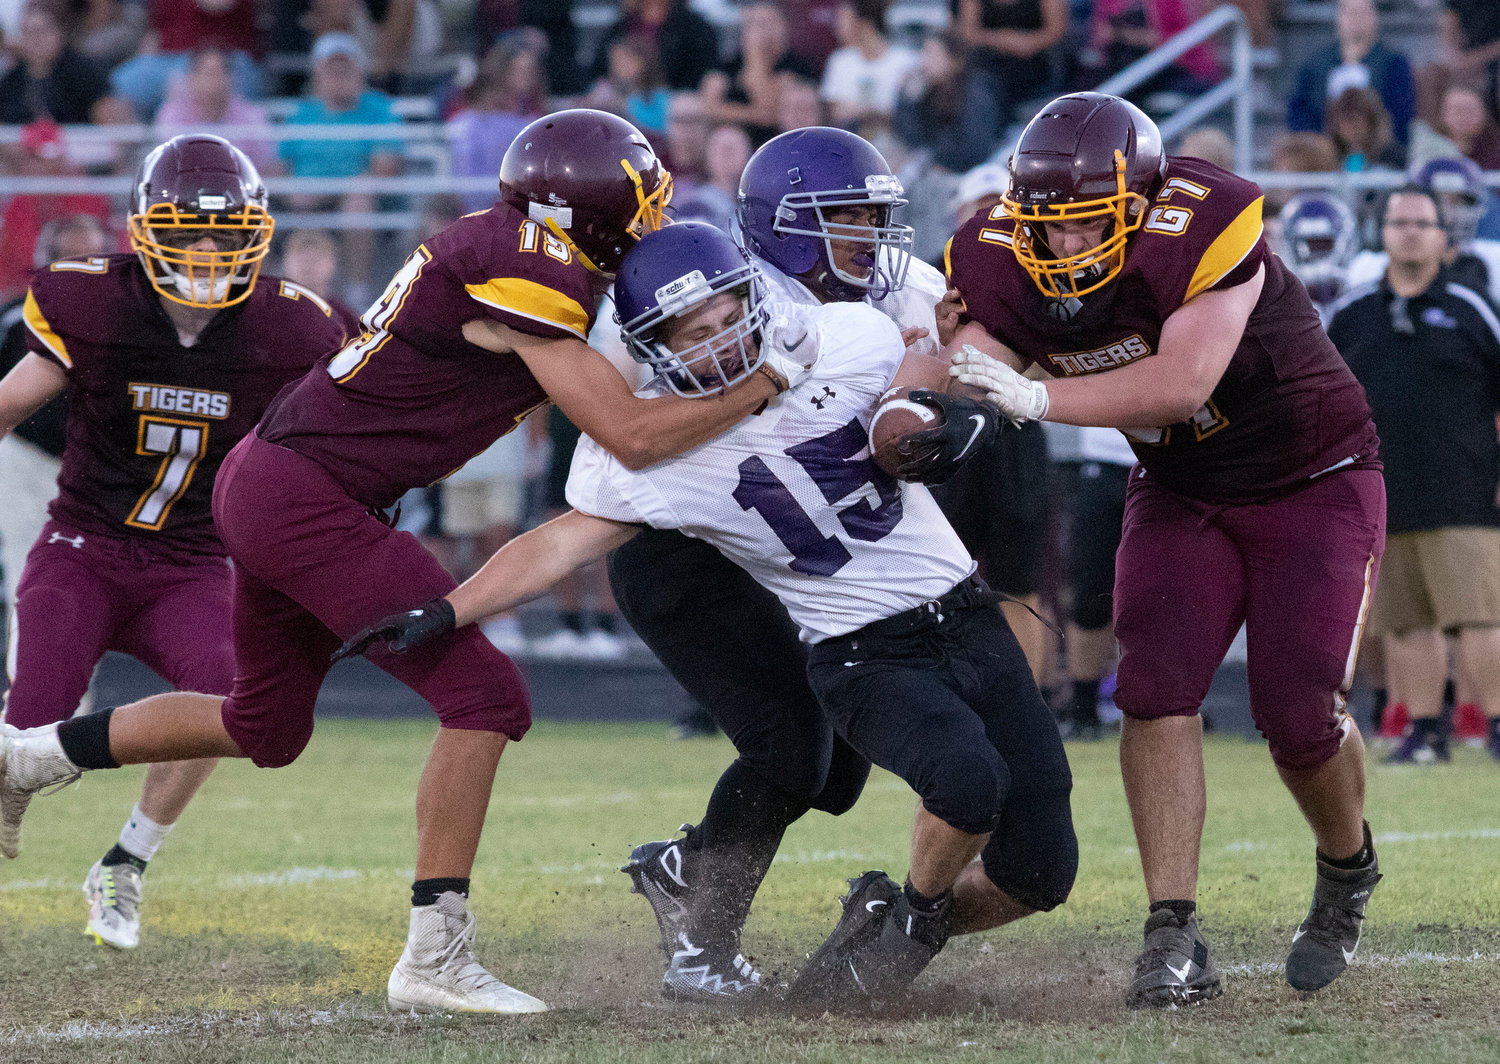 Tigers defenders Nick Reilly (left) and Tyler Garside tackle Huskies running back James Thibaudeau in the second quarter.